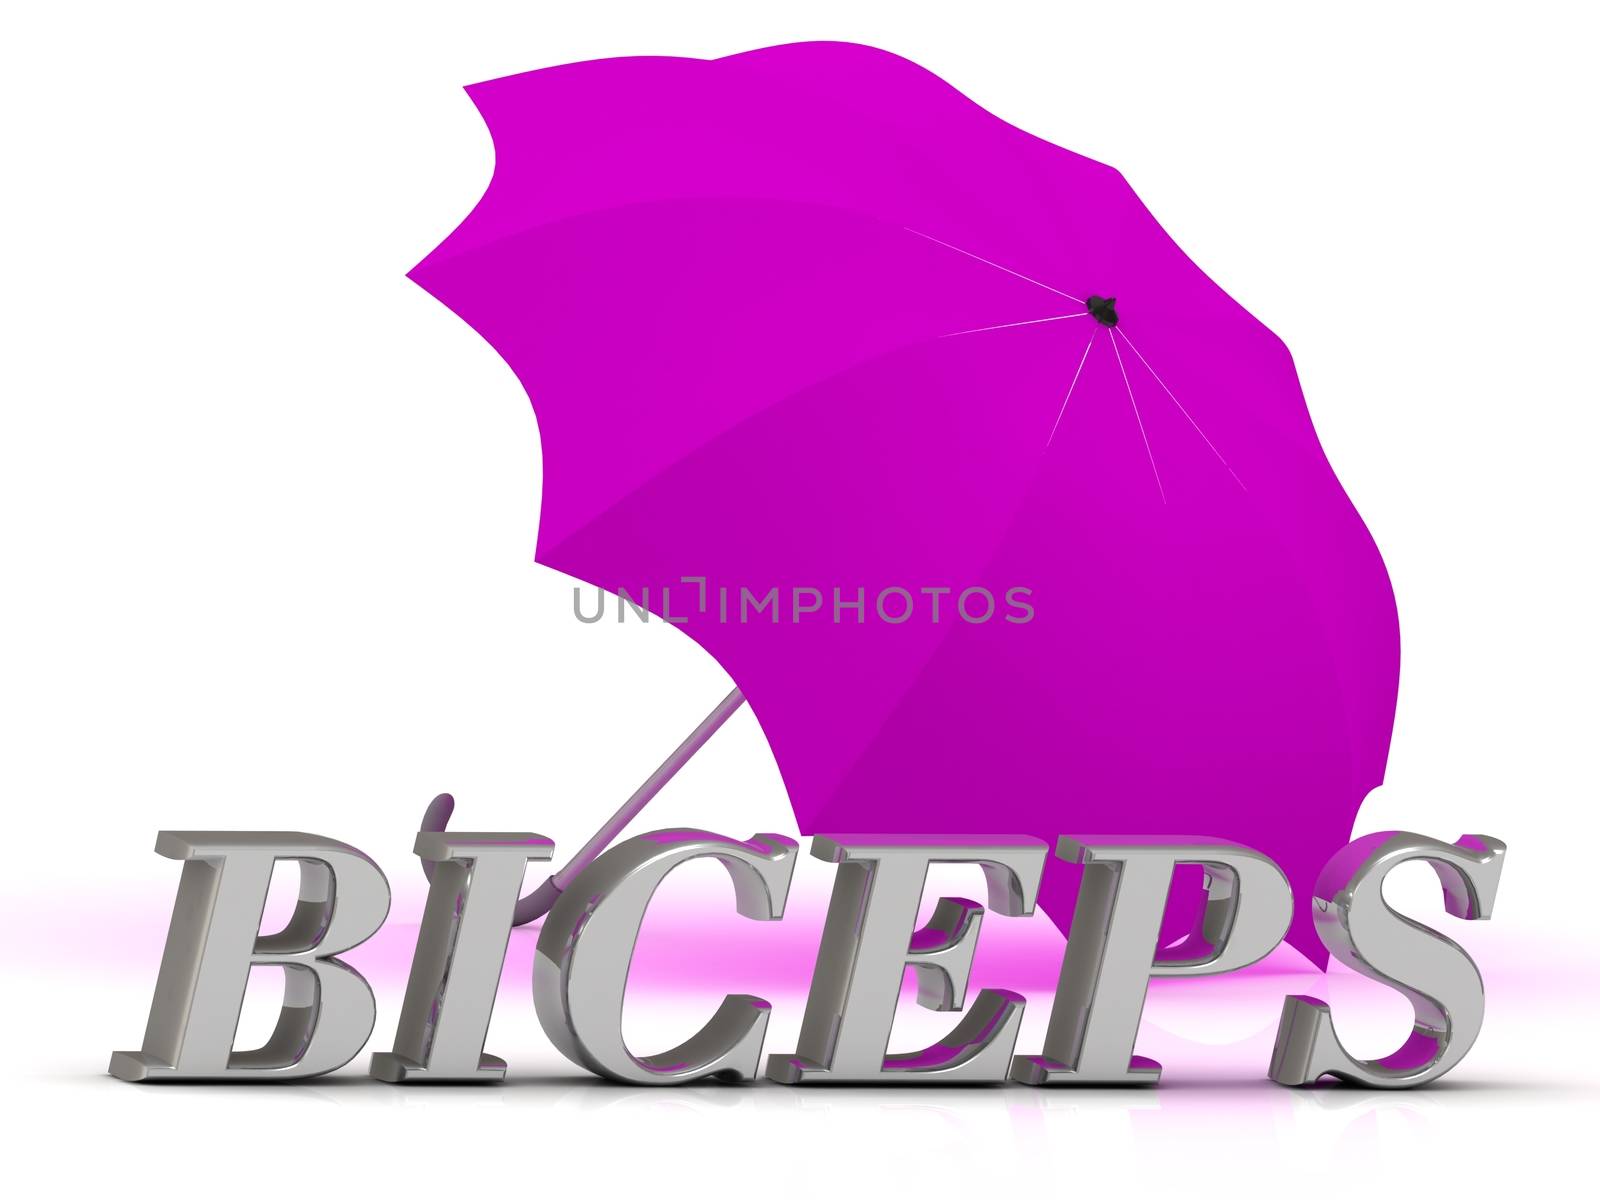 BICEPS- inscription of silver letters and umbrella on white background